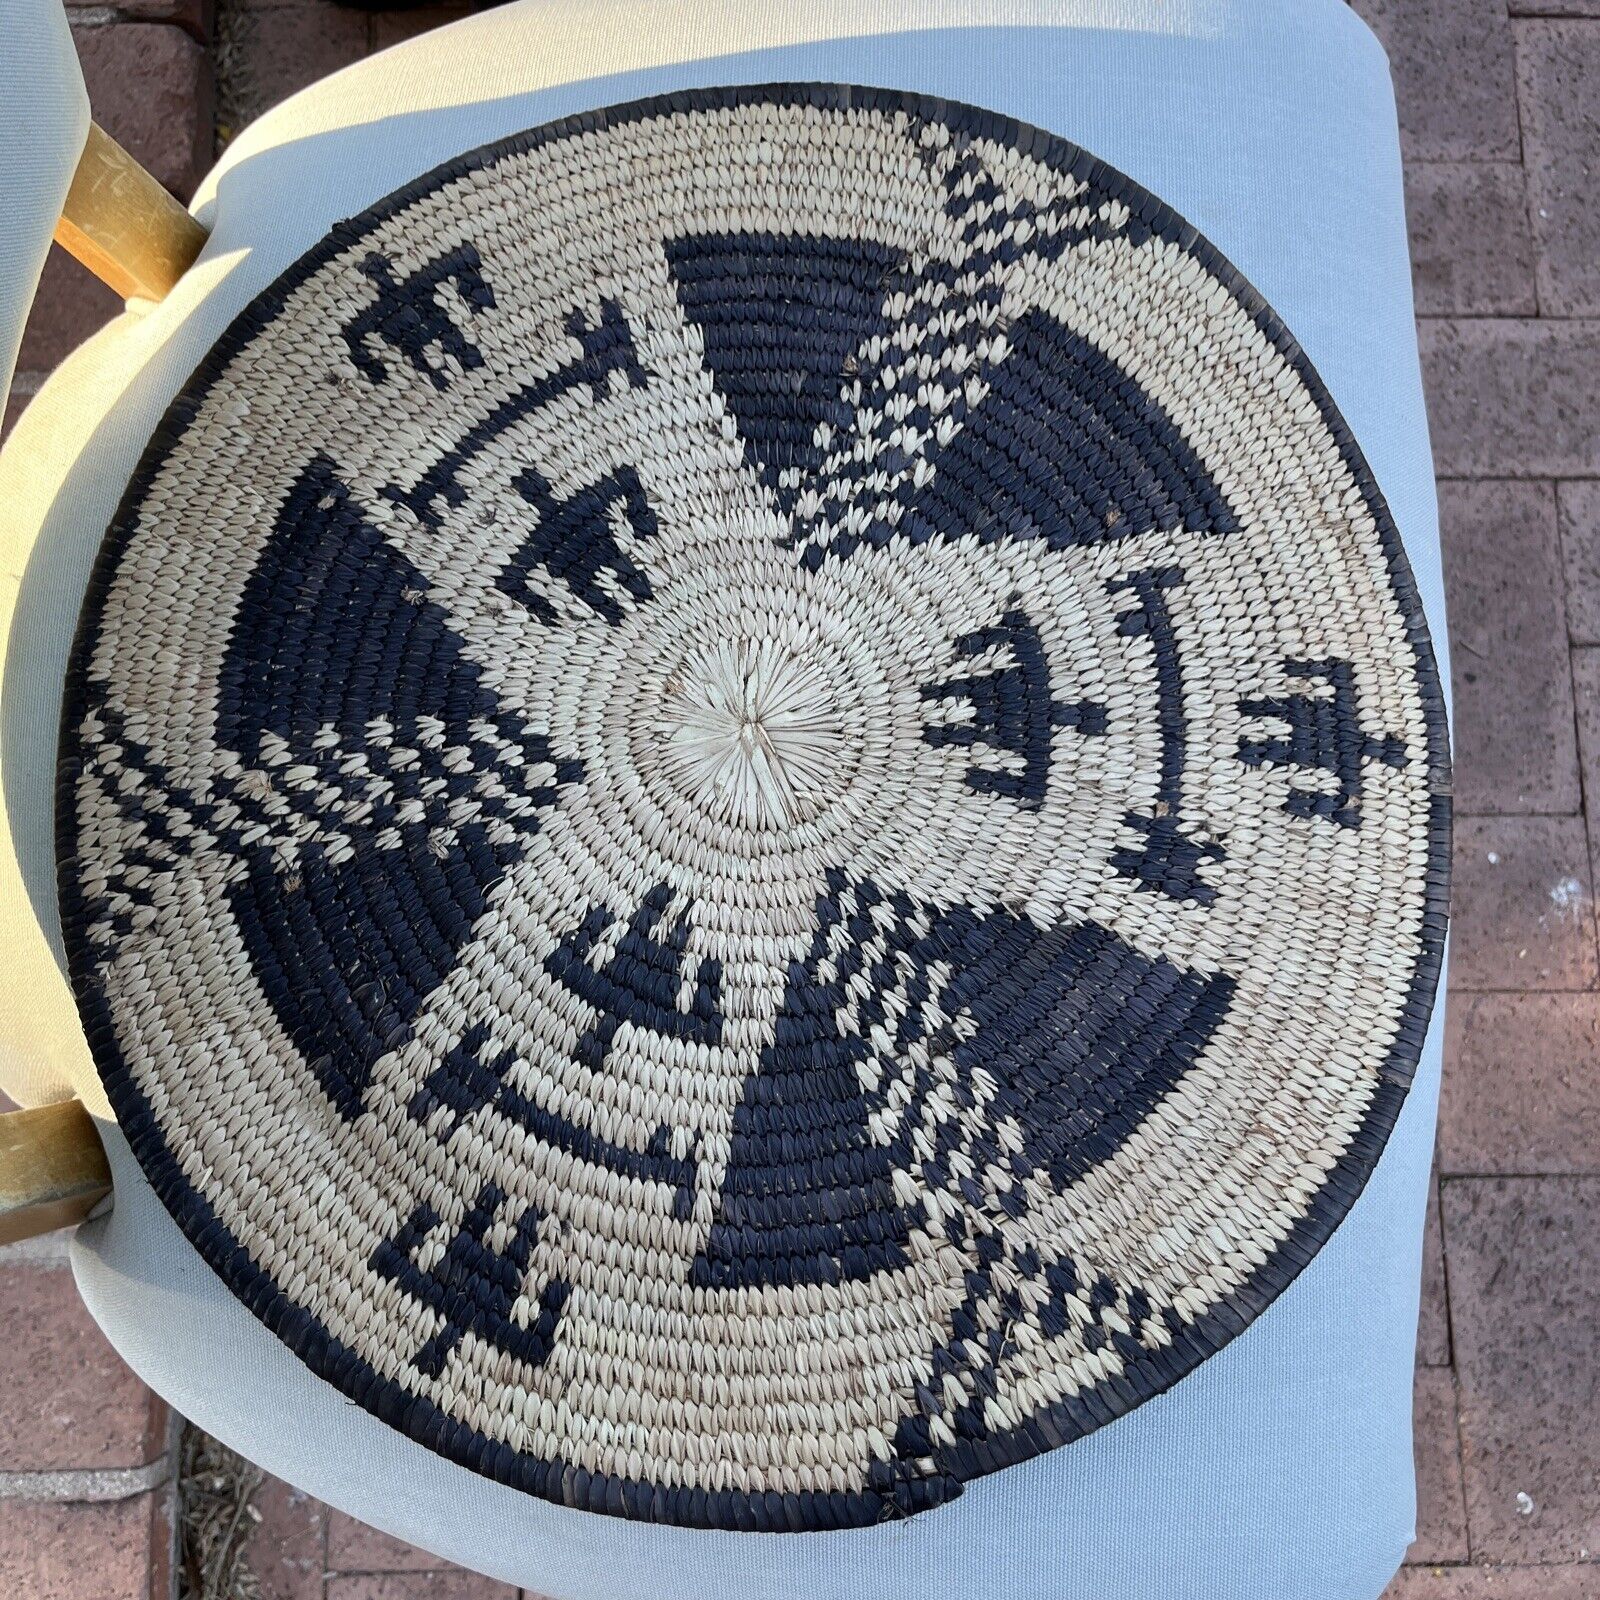 Vintage Hand Woven Flat Basket Native American? African? 16in